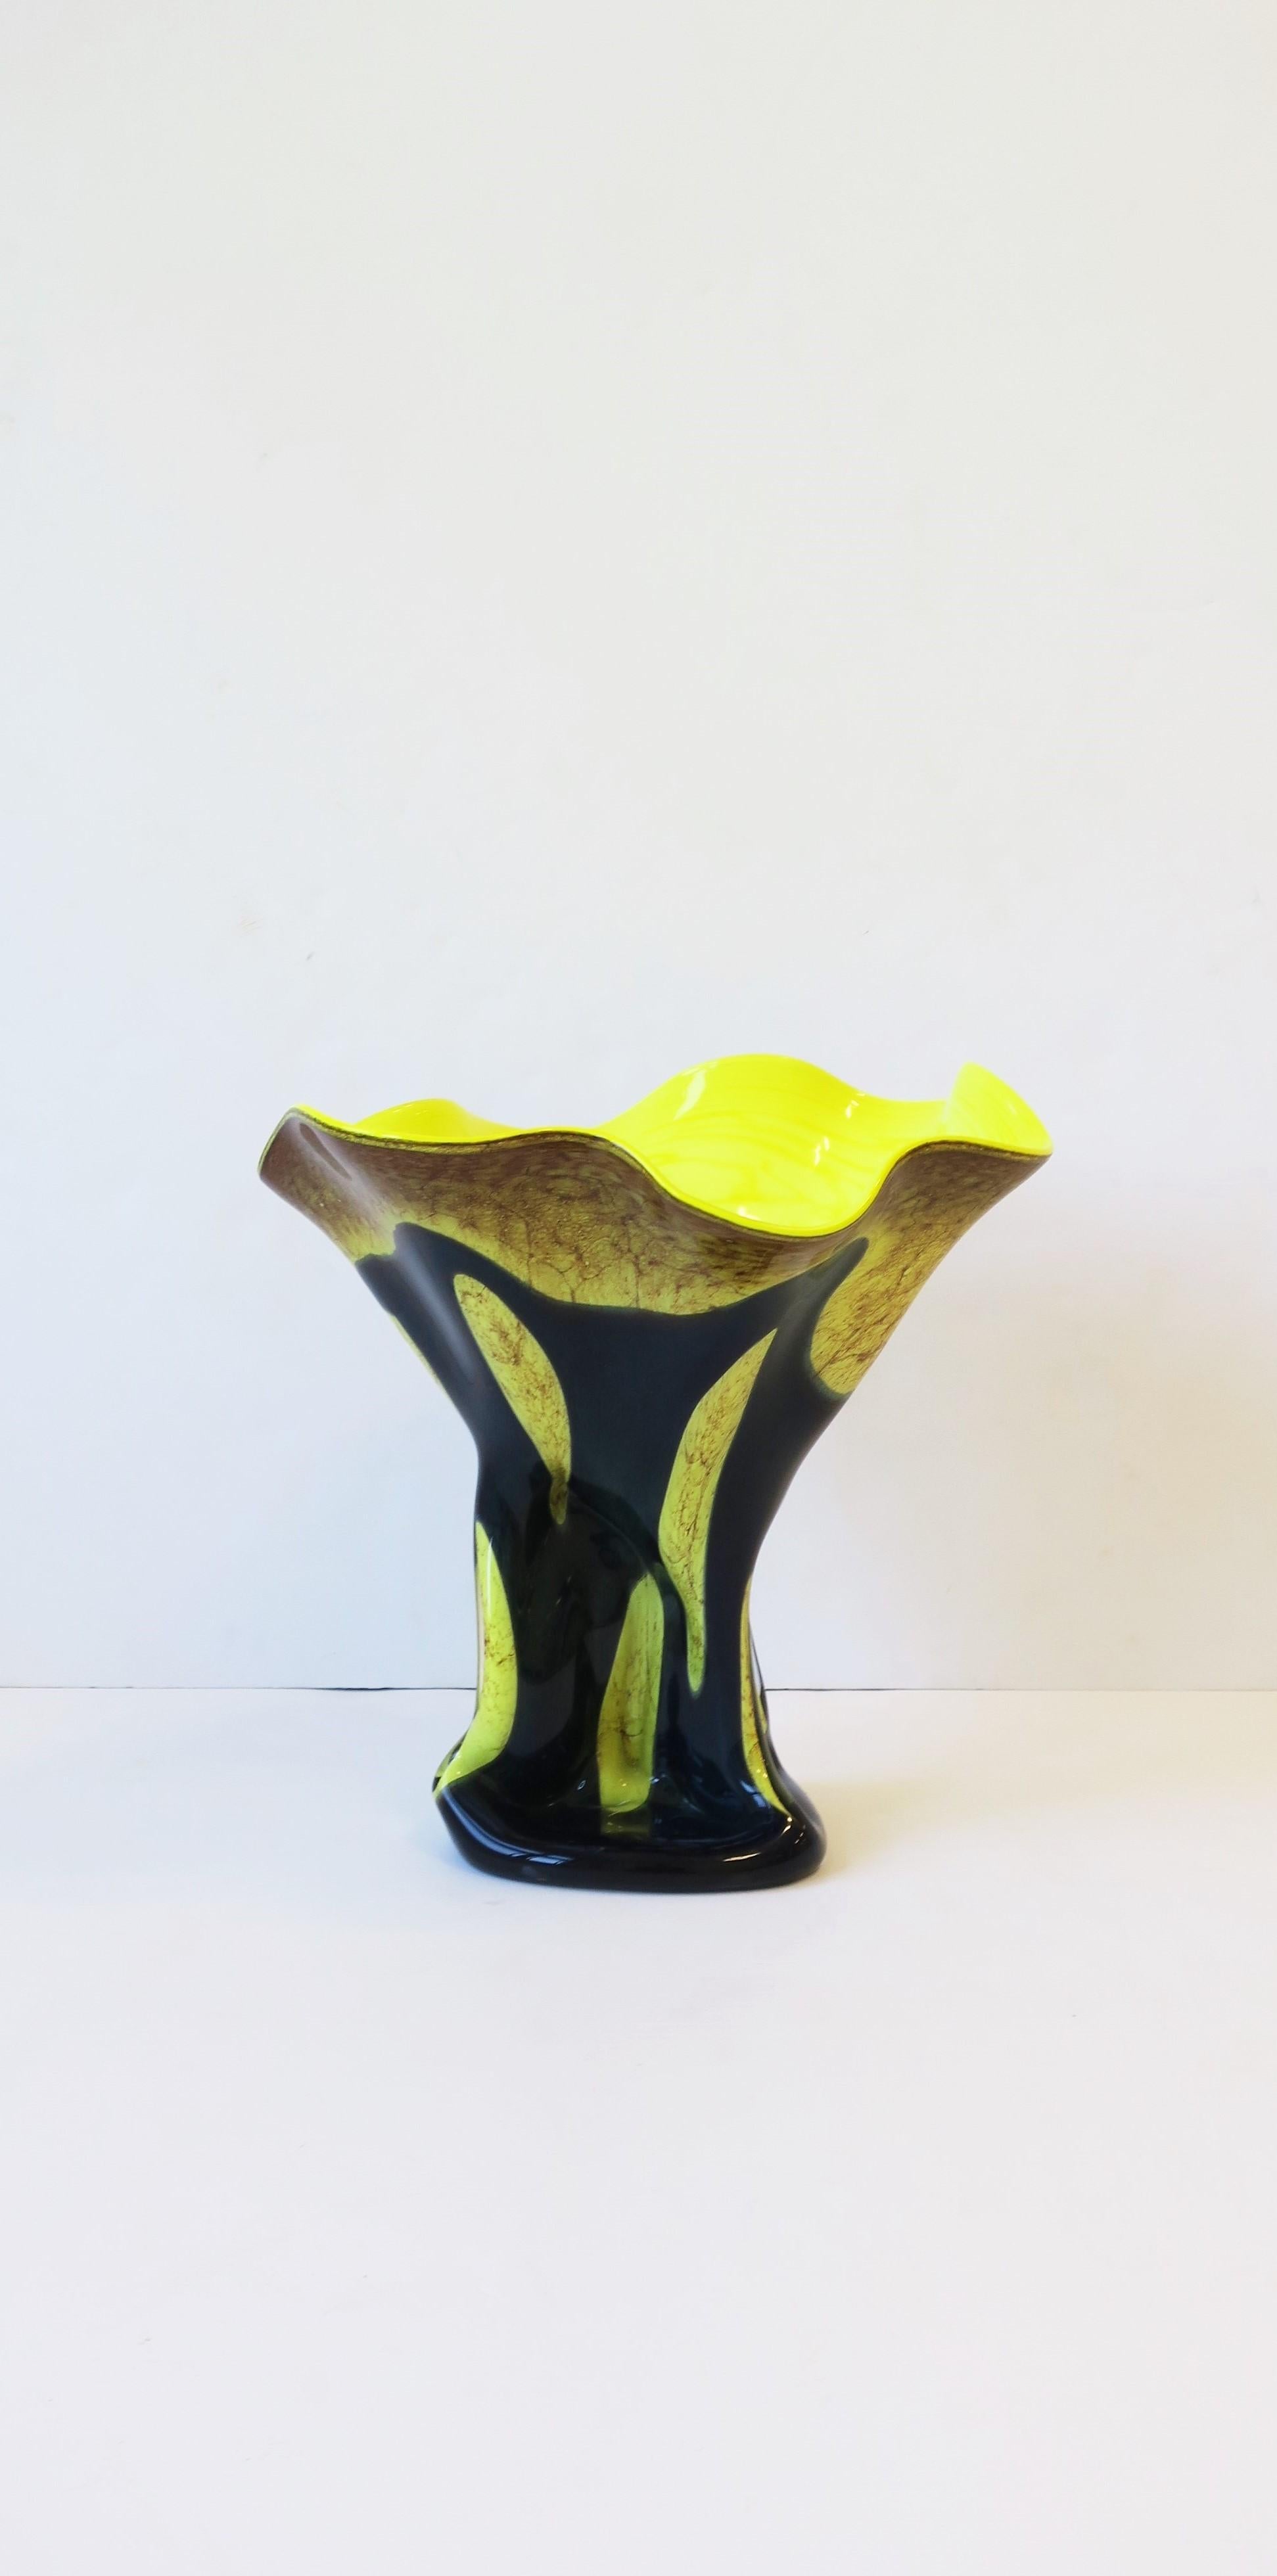 A very beautiful organic modern hand-blown bright neon yellow and dark teal blue studio art glass sculpture vase, circa mid to late-20th century. Beautiful as a standalone piece or with flowers, branches, etc. Polished pontil mark on underside as